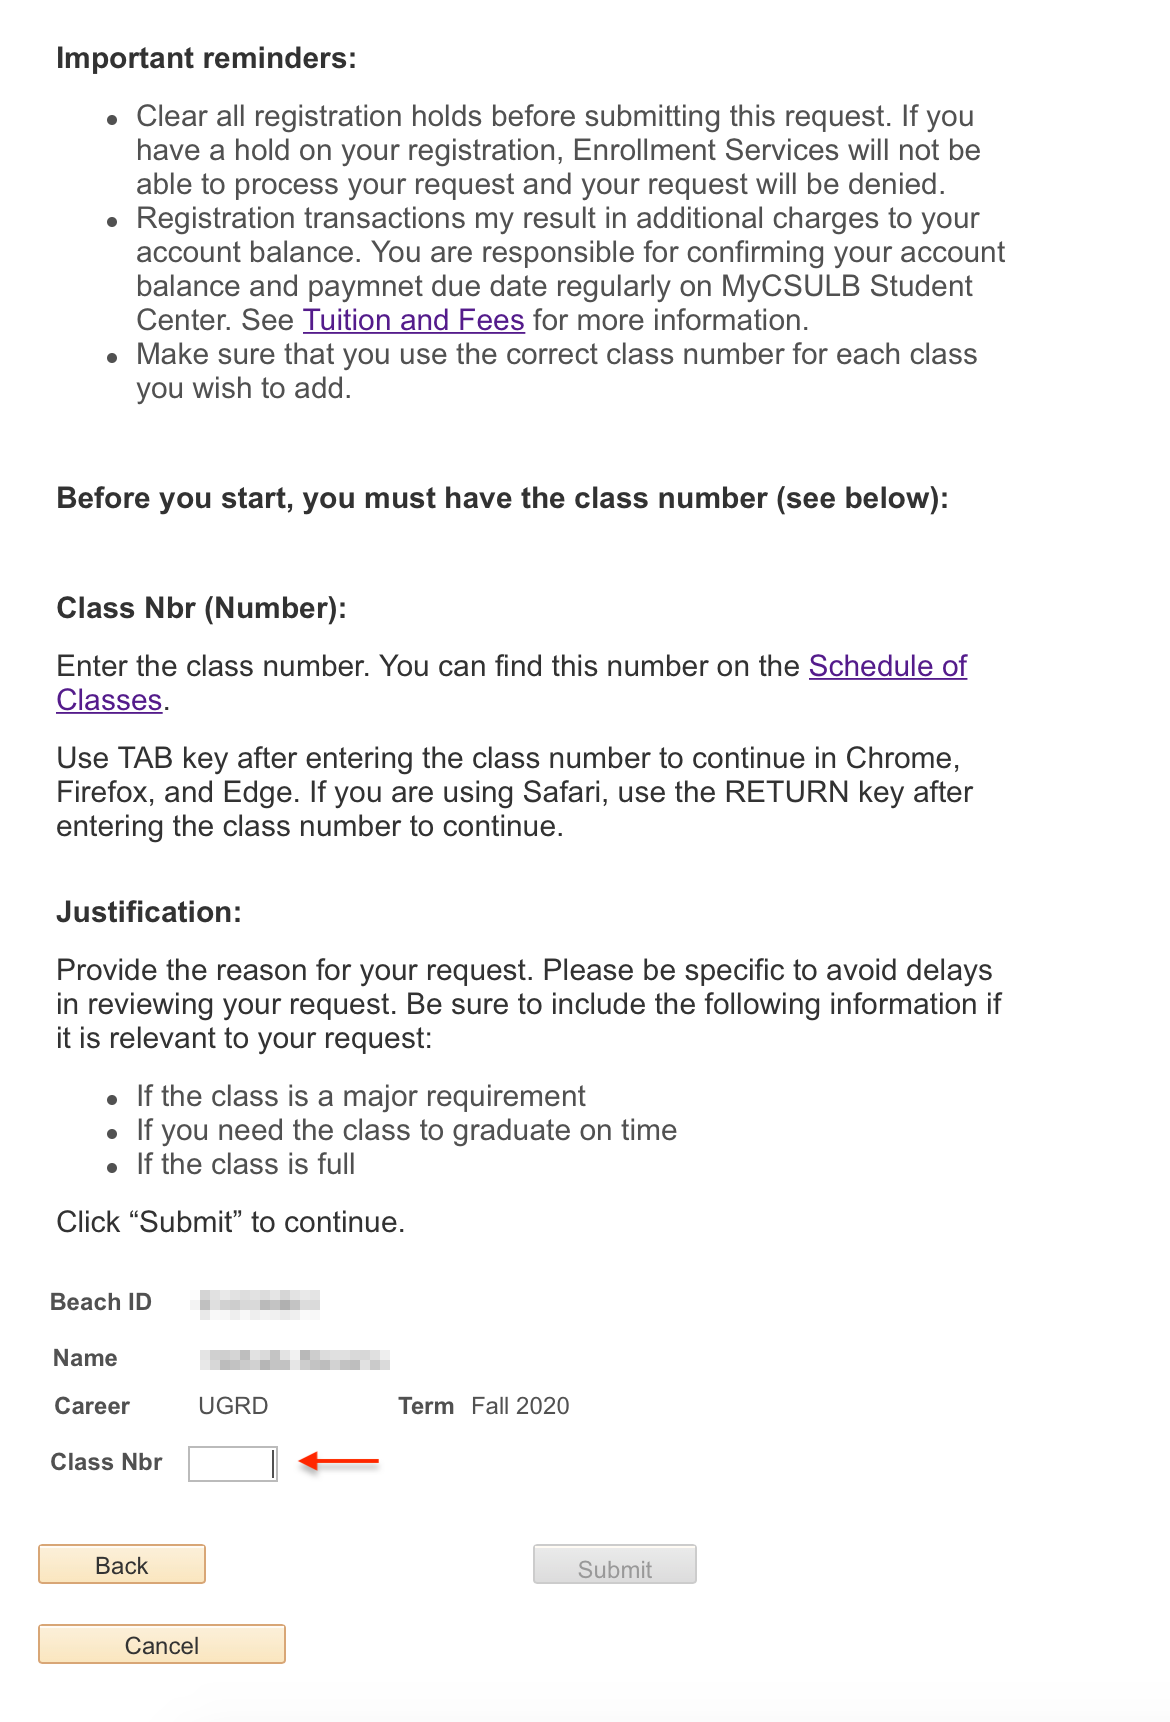 Screenshot of Class Number field and instructions